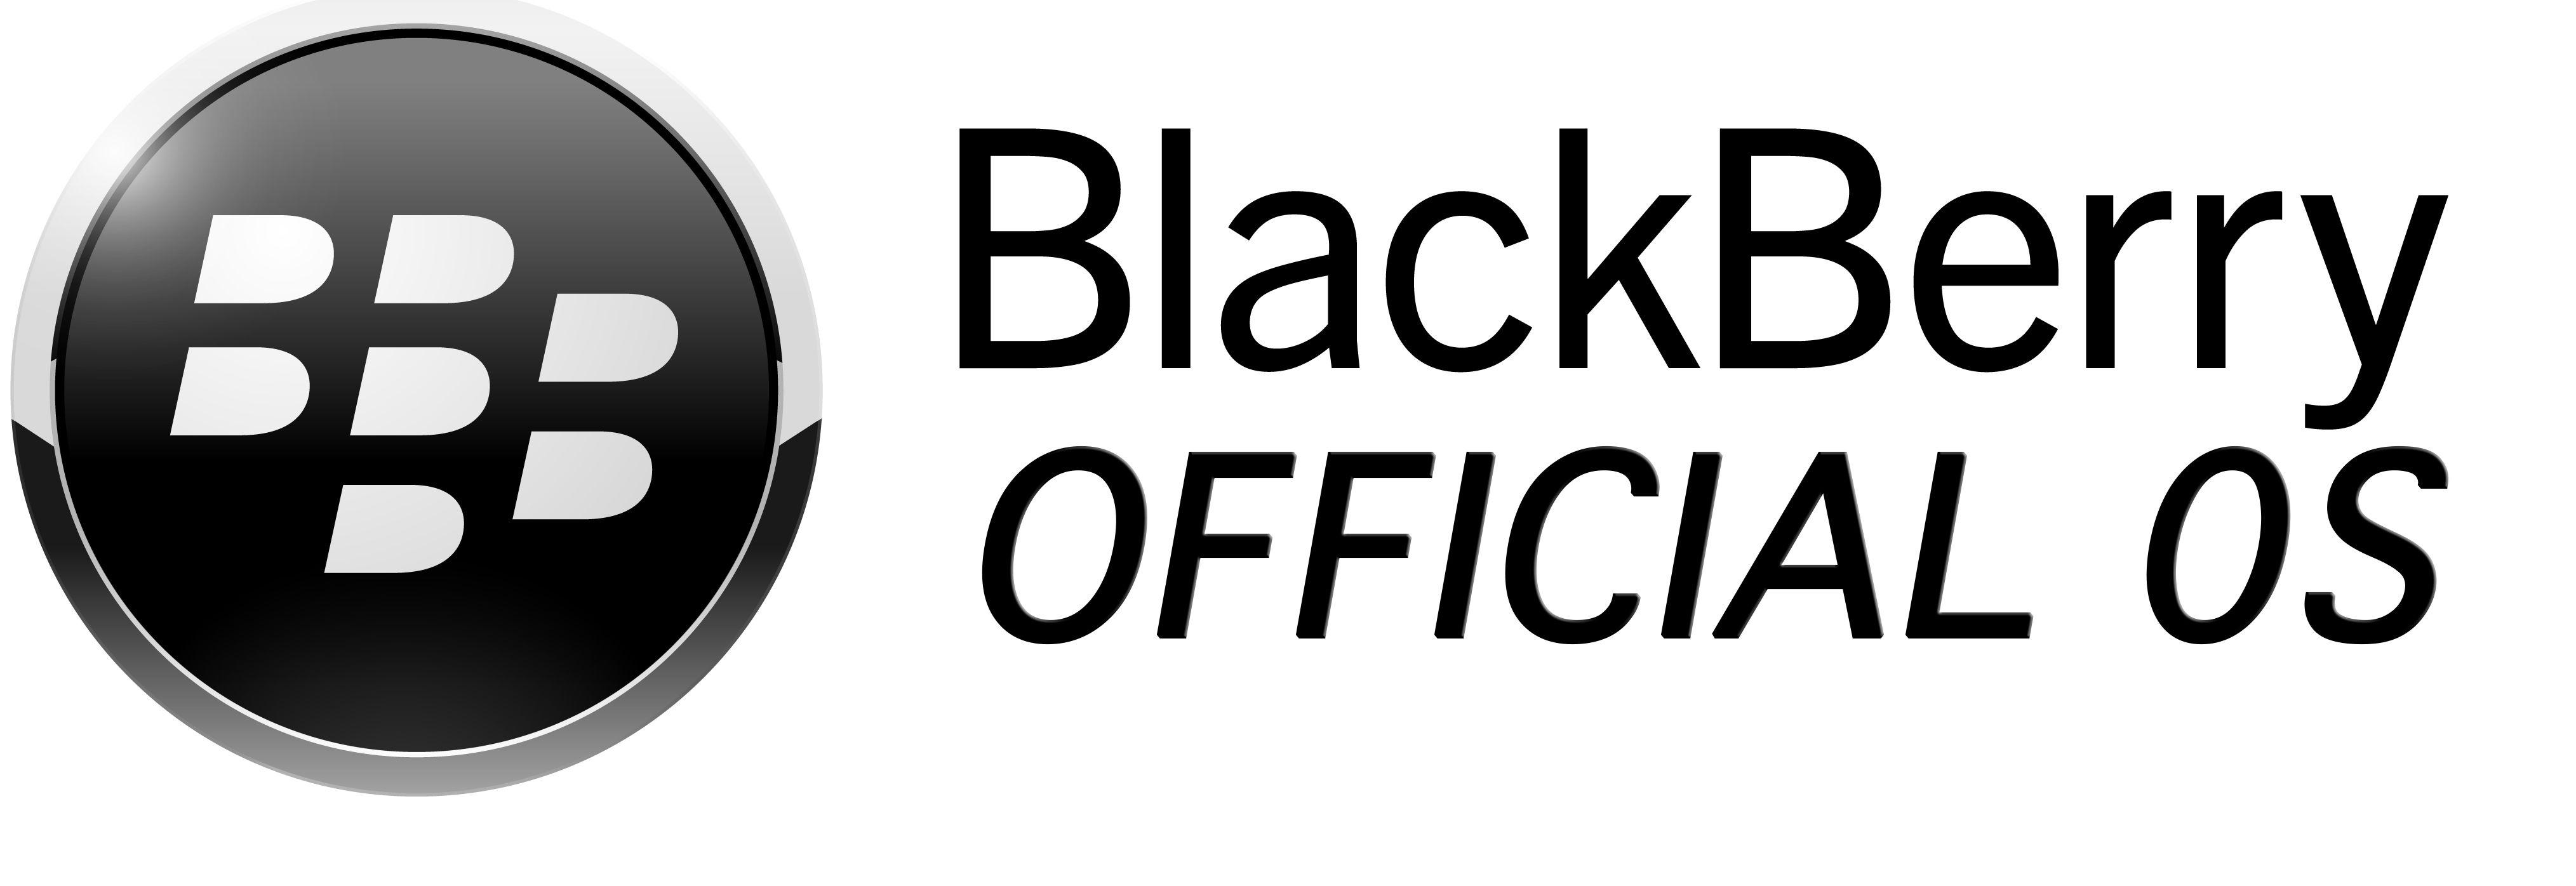 BlackBerry OS Logo - All Blackberry Latest Official OS Download Here